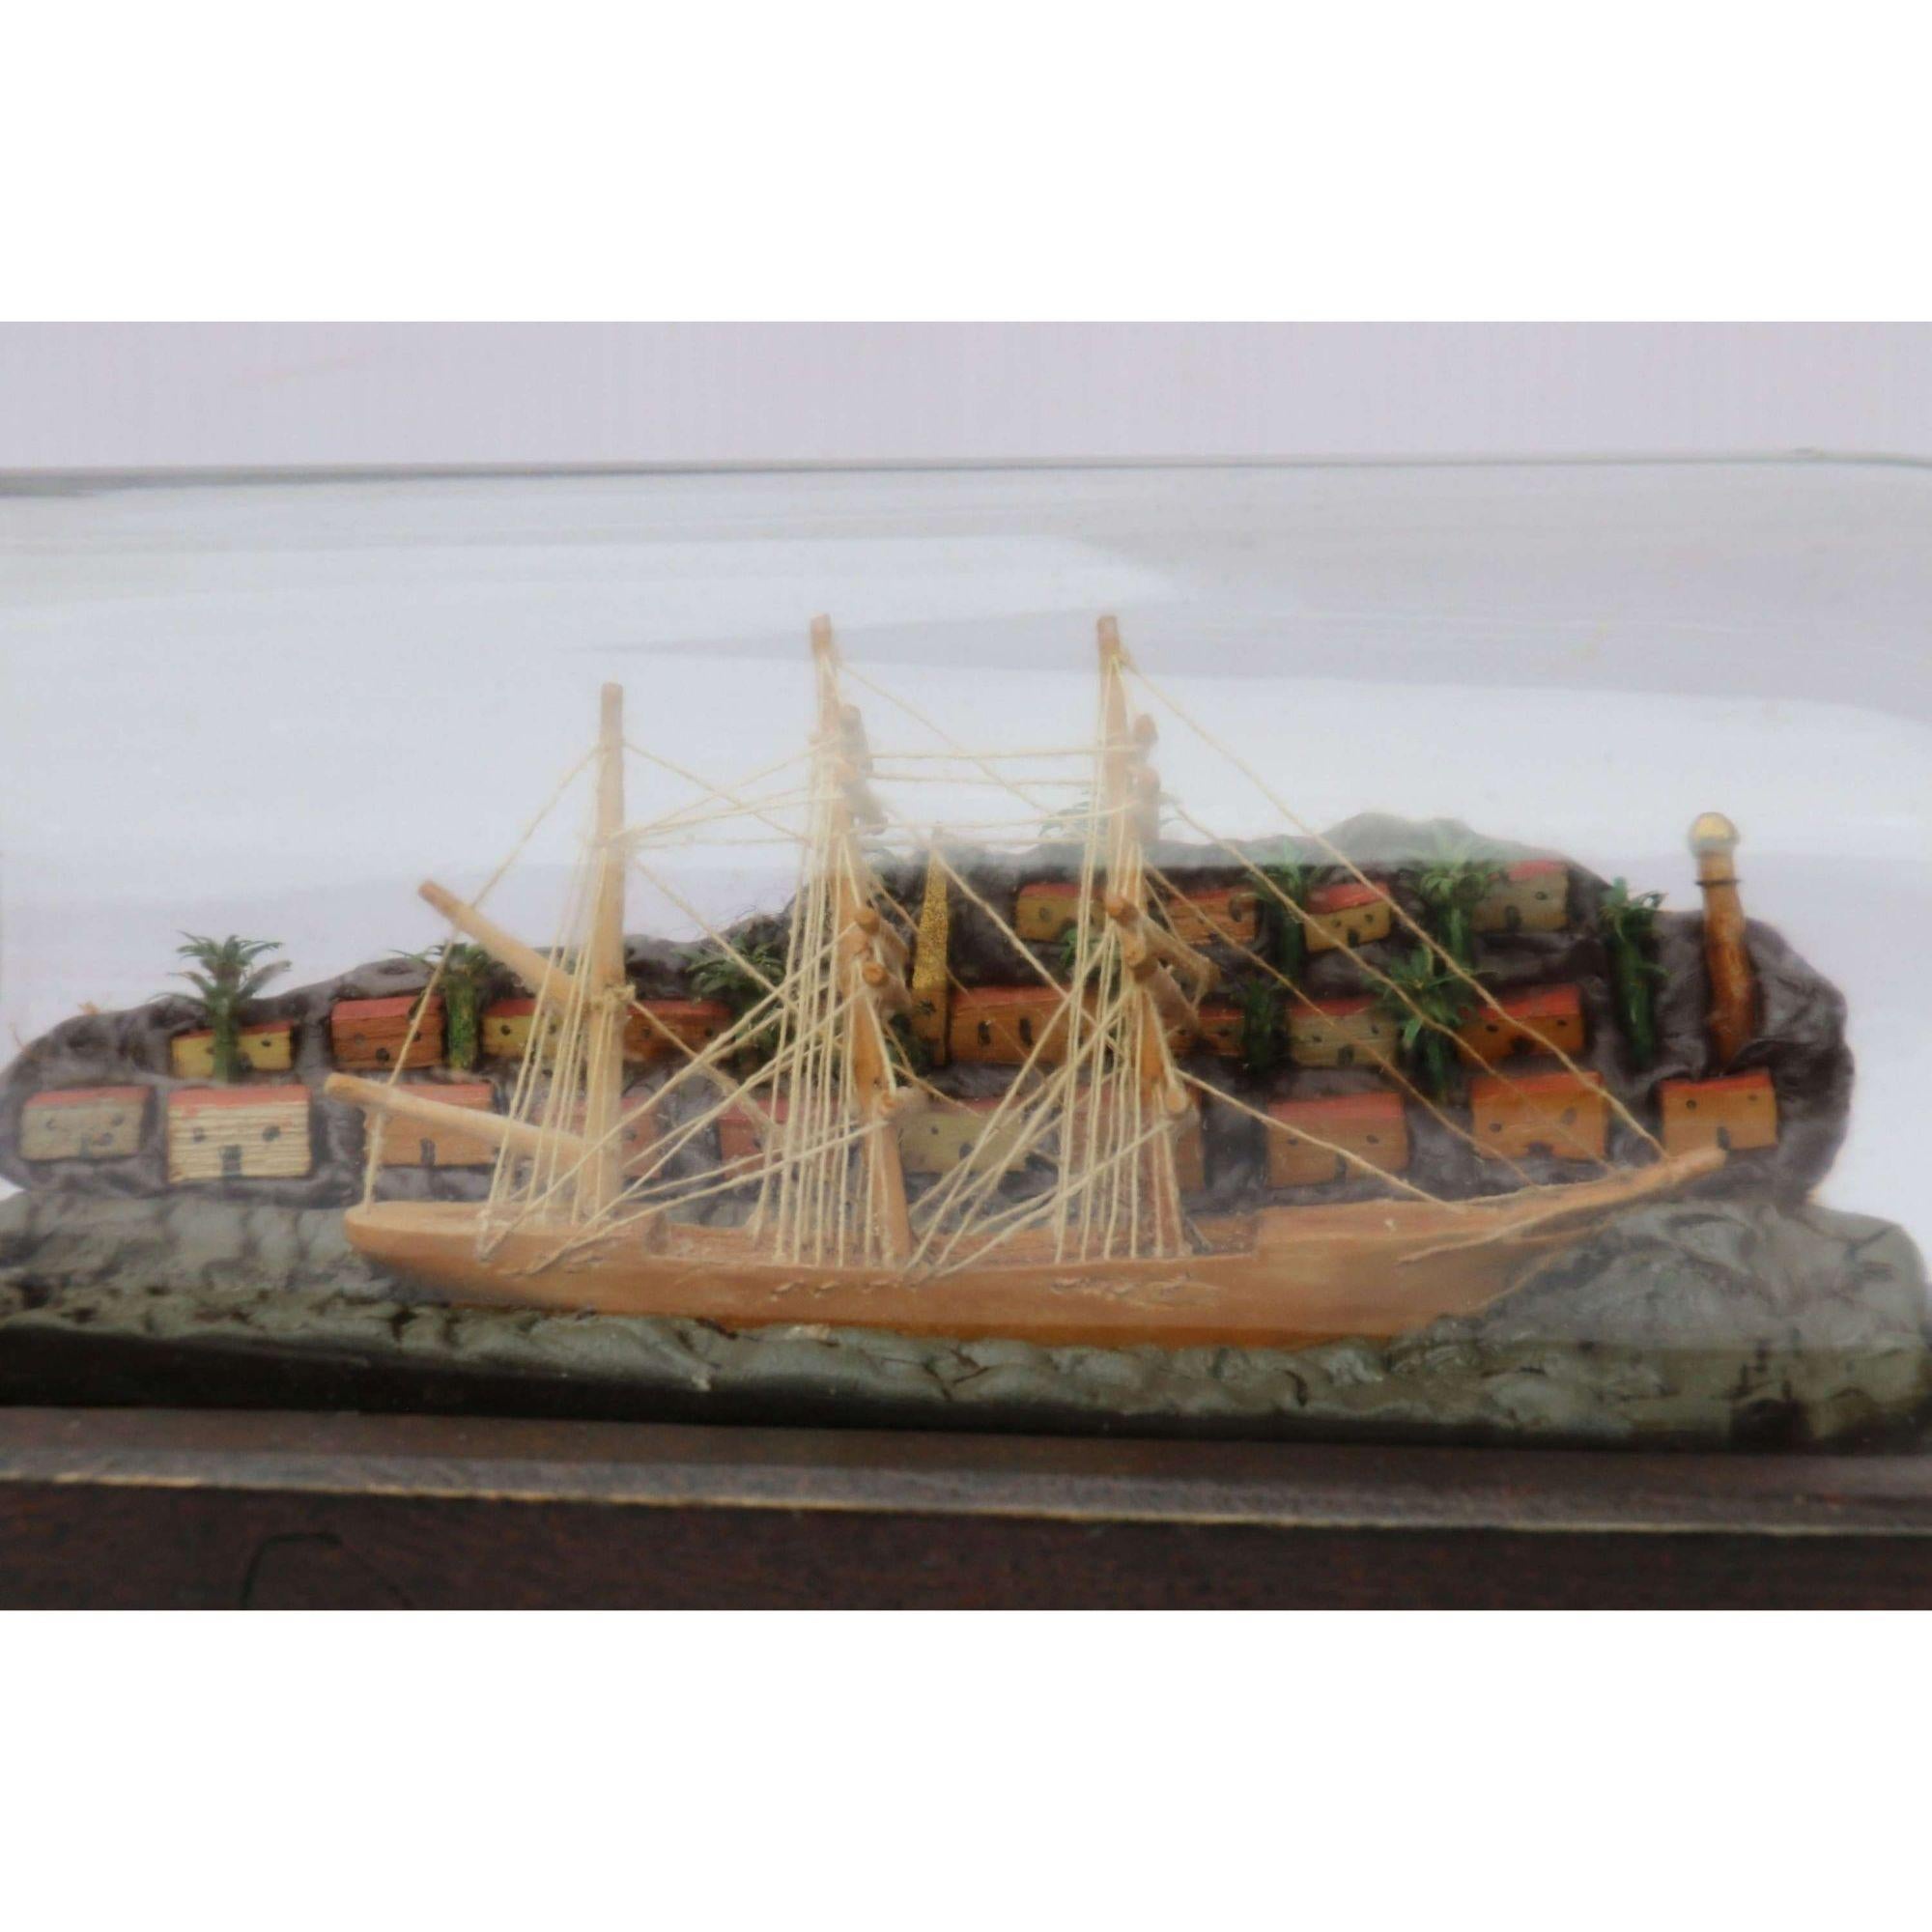 Early 20th Century Model Ship Diorama Within a Bottle, circa 1920 For Sale 1